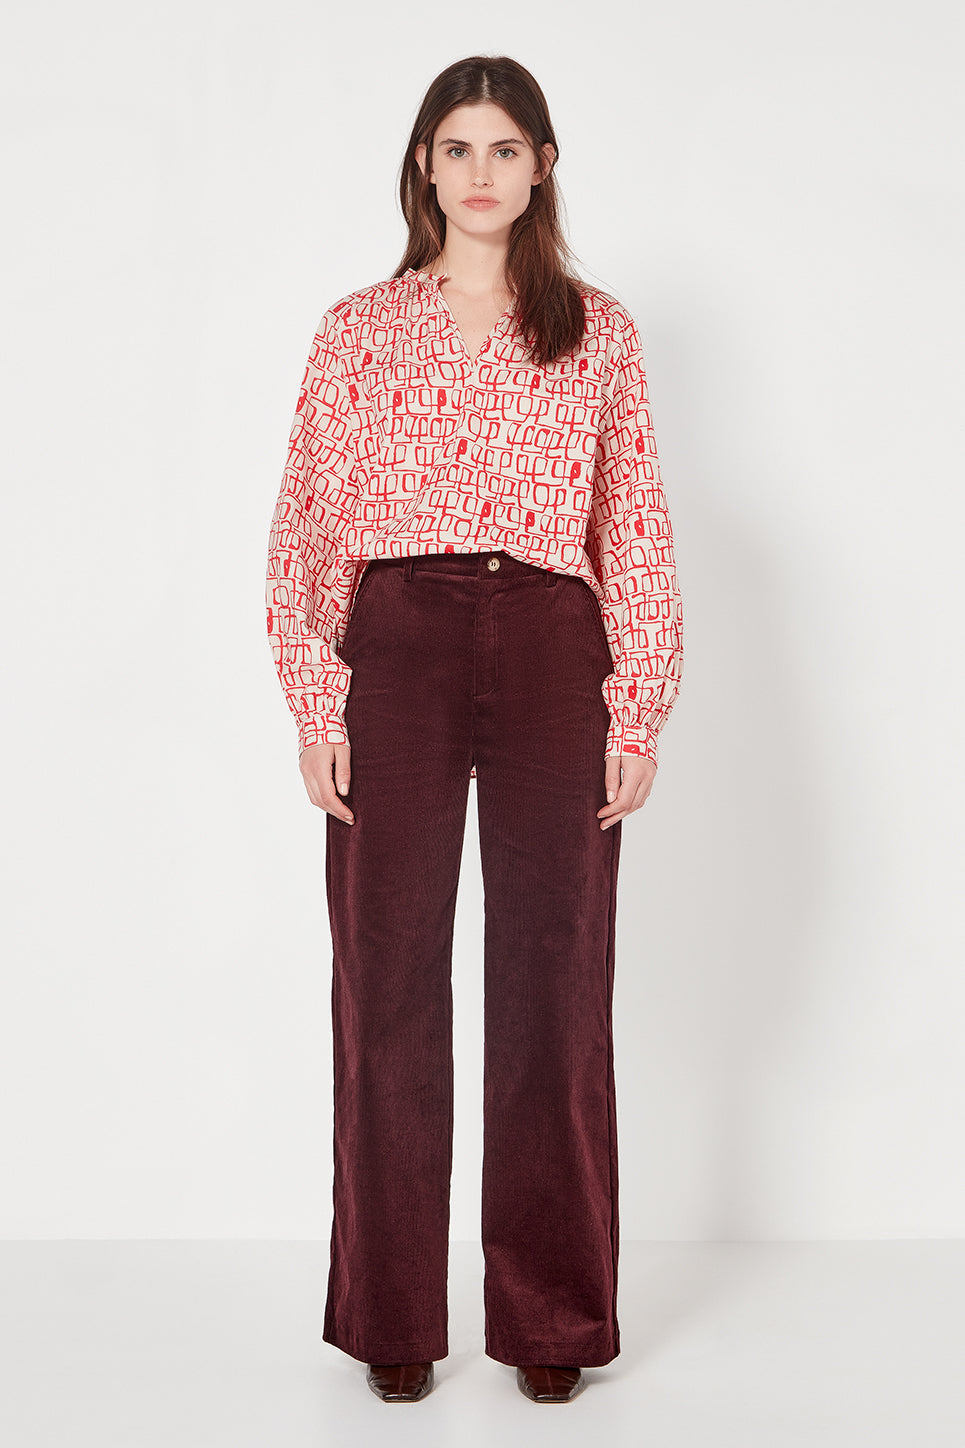 The Matisse Blouse in Abstract Print